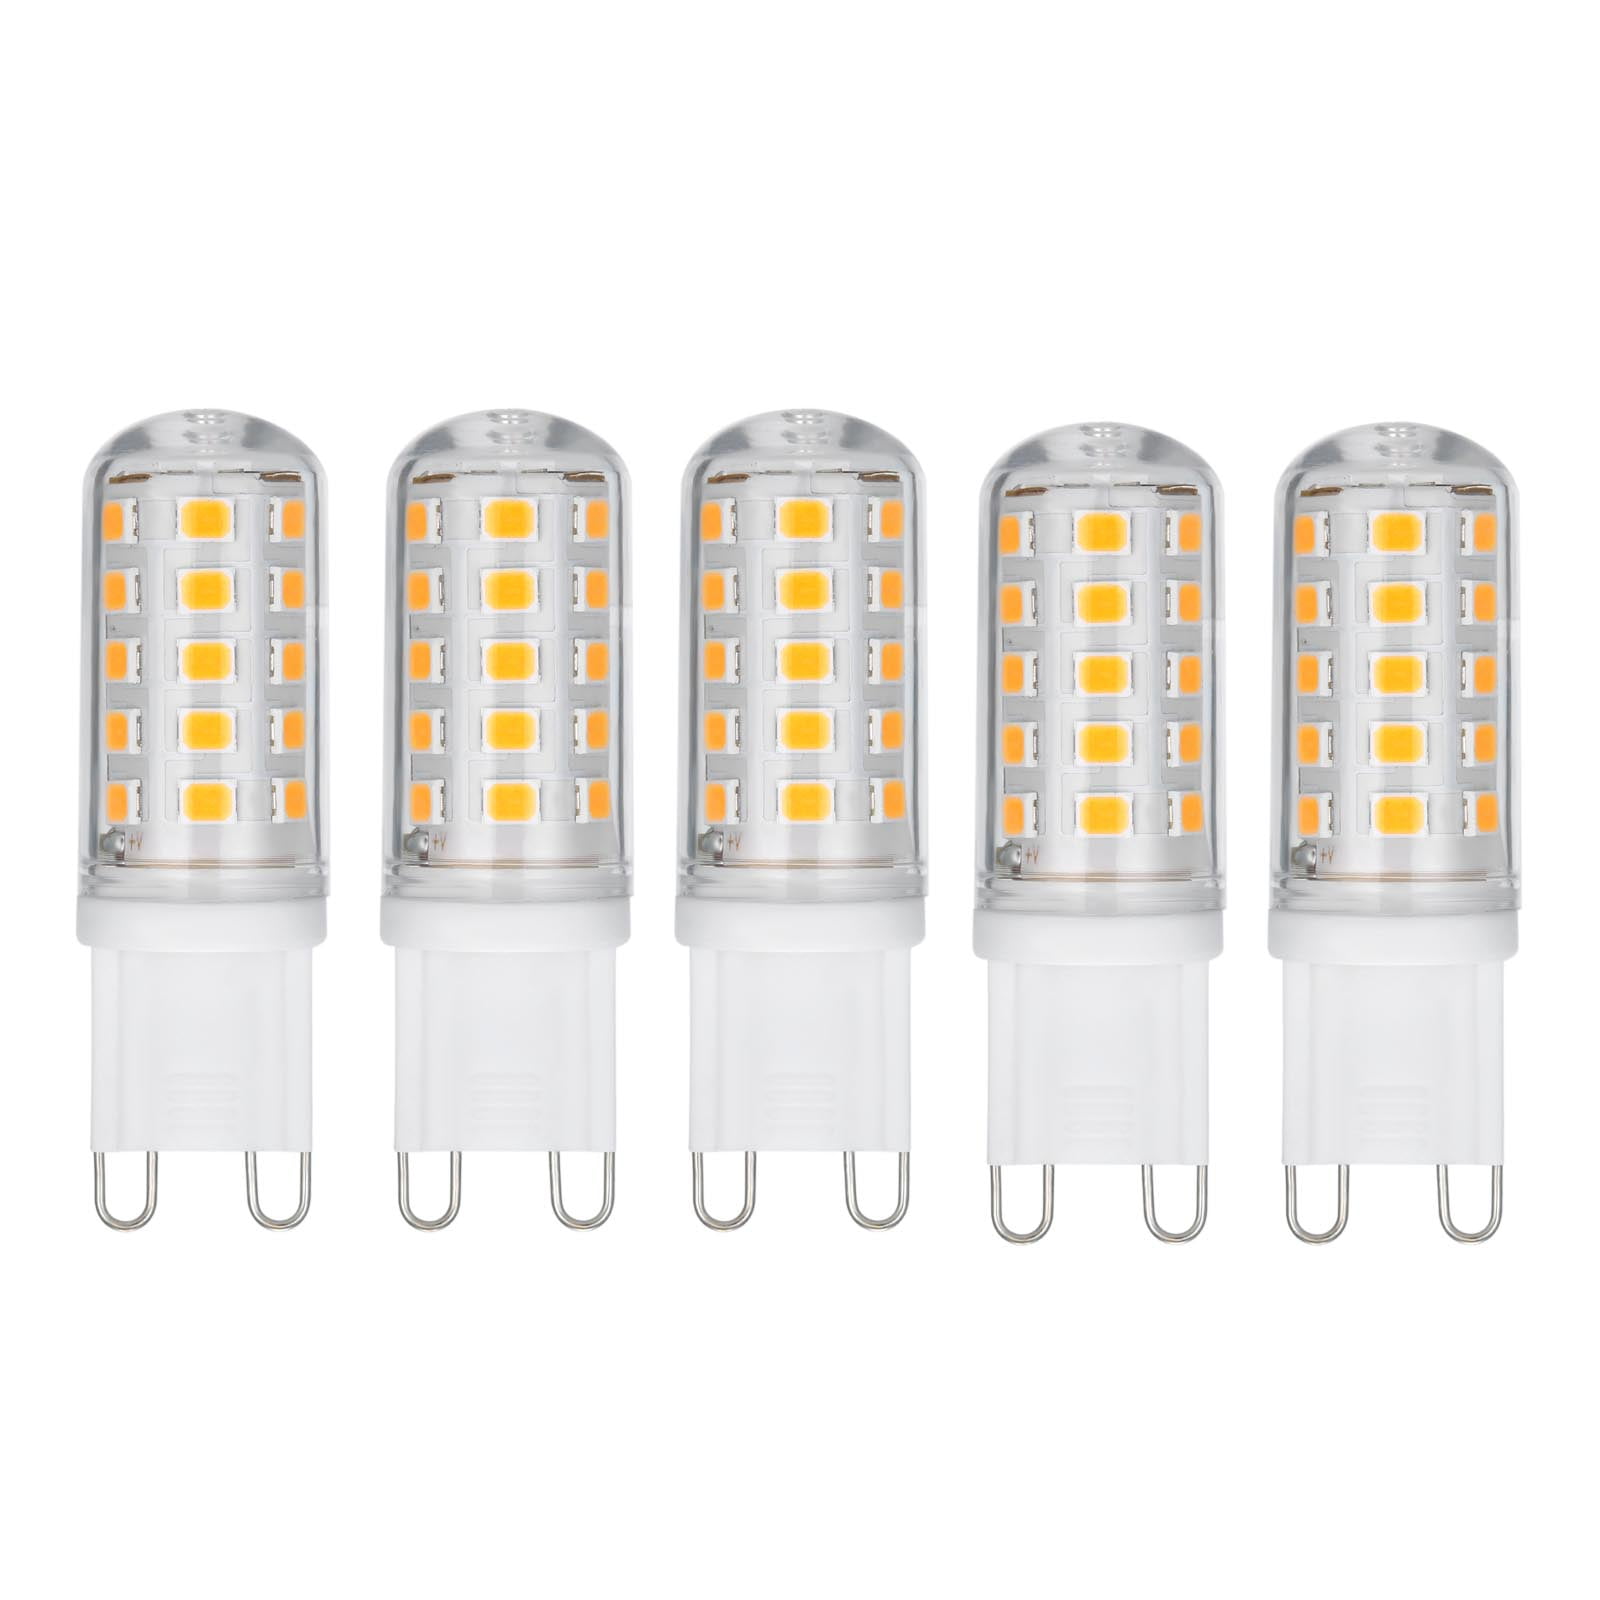 No Flicker Dimmable Clear Capsule 60W 230V 2800K Warm White Light No Strobe 12pack G9 Halogen Bulbs 360° Viewing Angle 60W